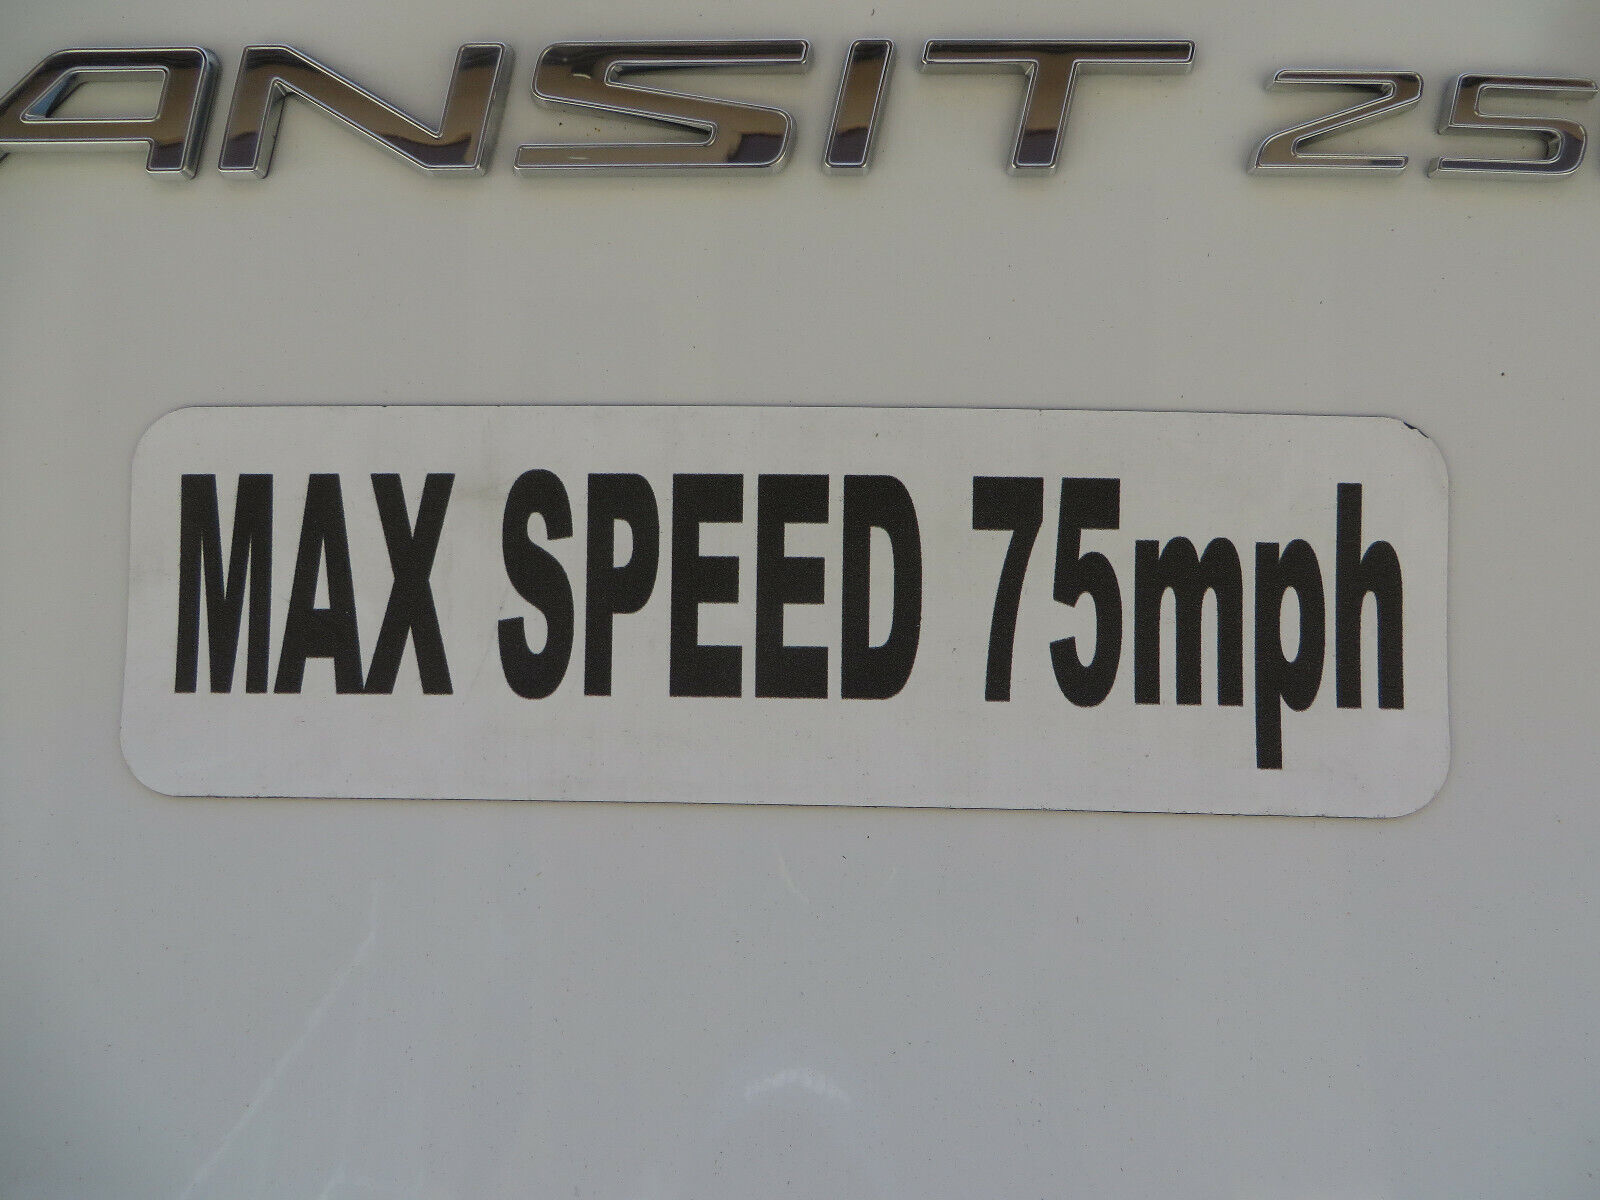 Max Speed 75 MPH Magnet for Work Vehicles restricted by regulator 10 x 3 Magnet